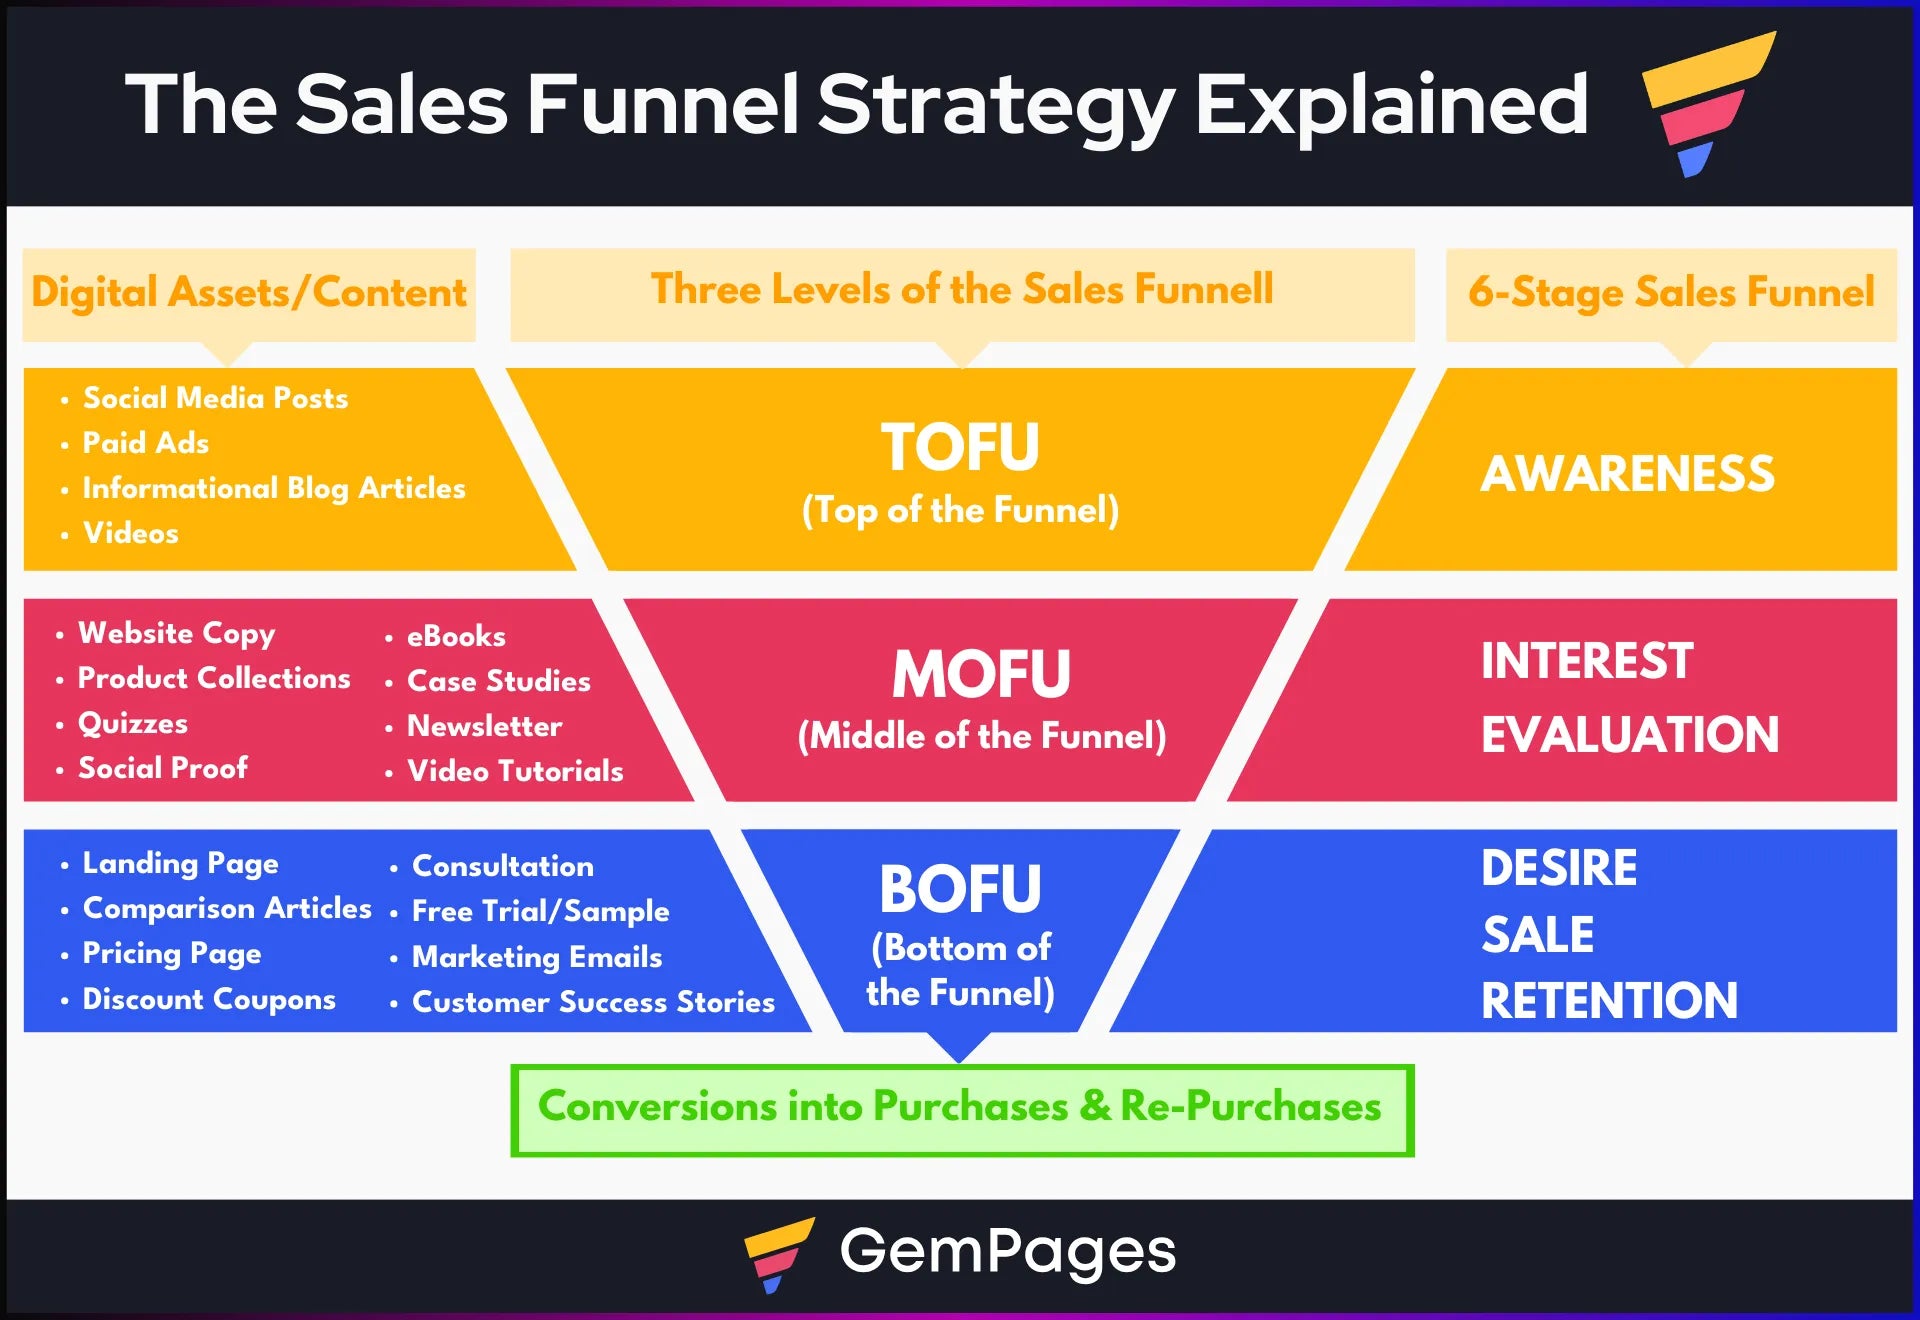 Graphical representation of a sales funnel strategy with different stages and content types